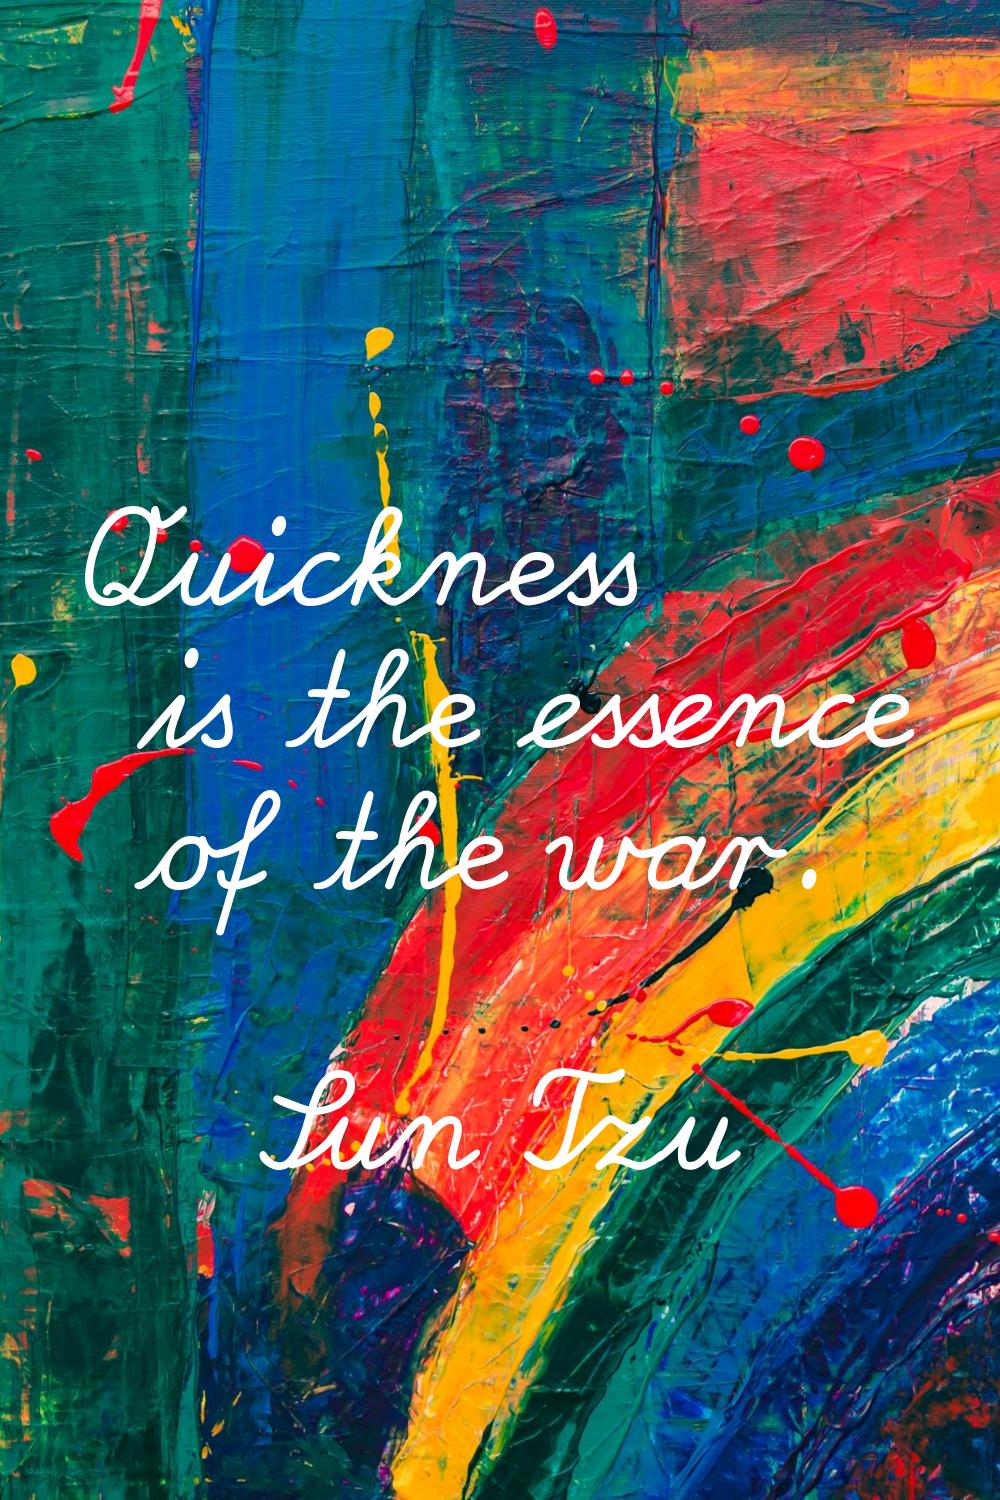 Quickness is the essence of the war.